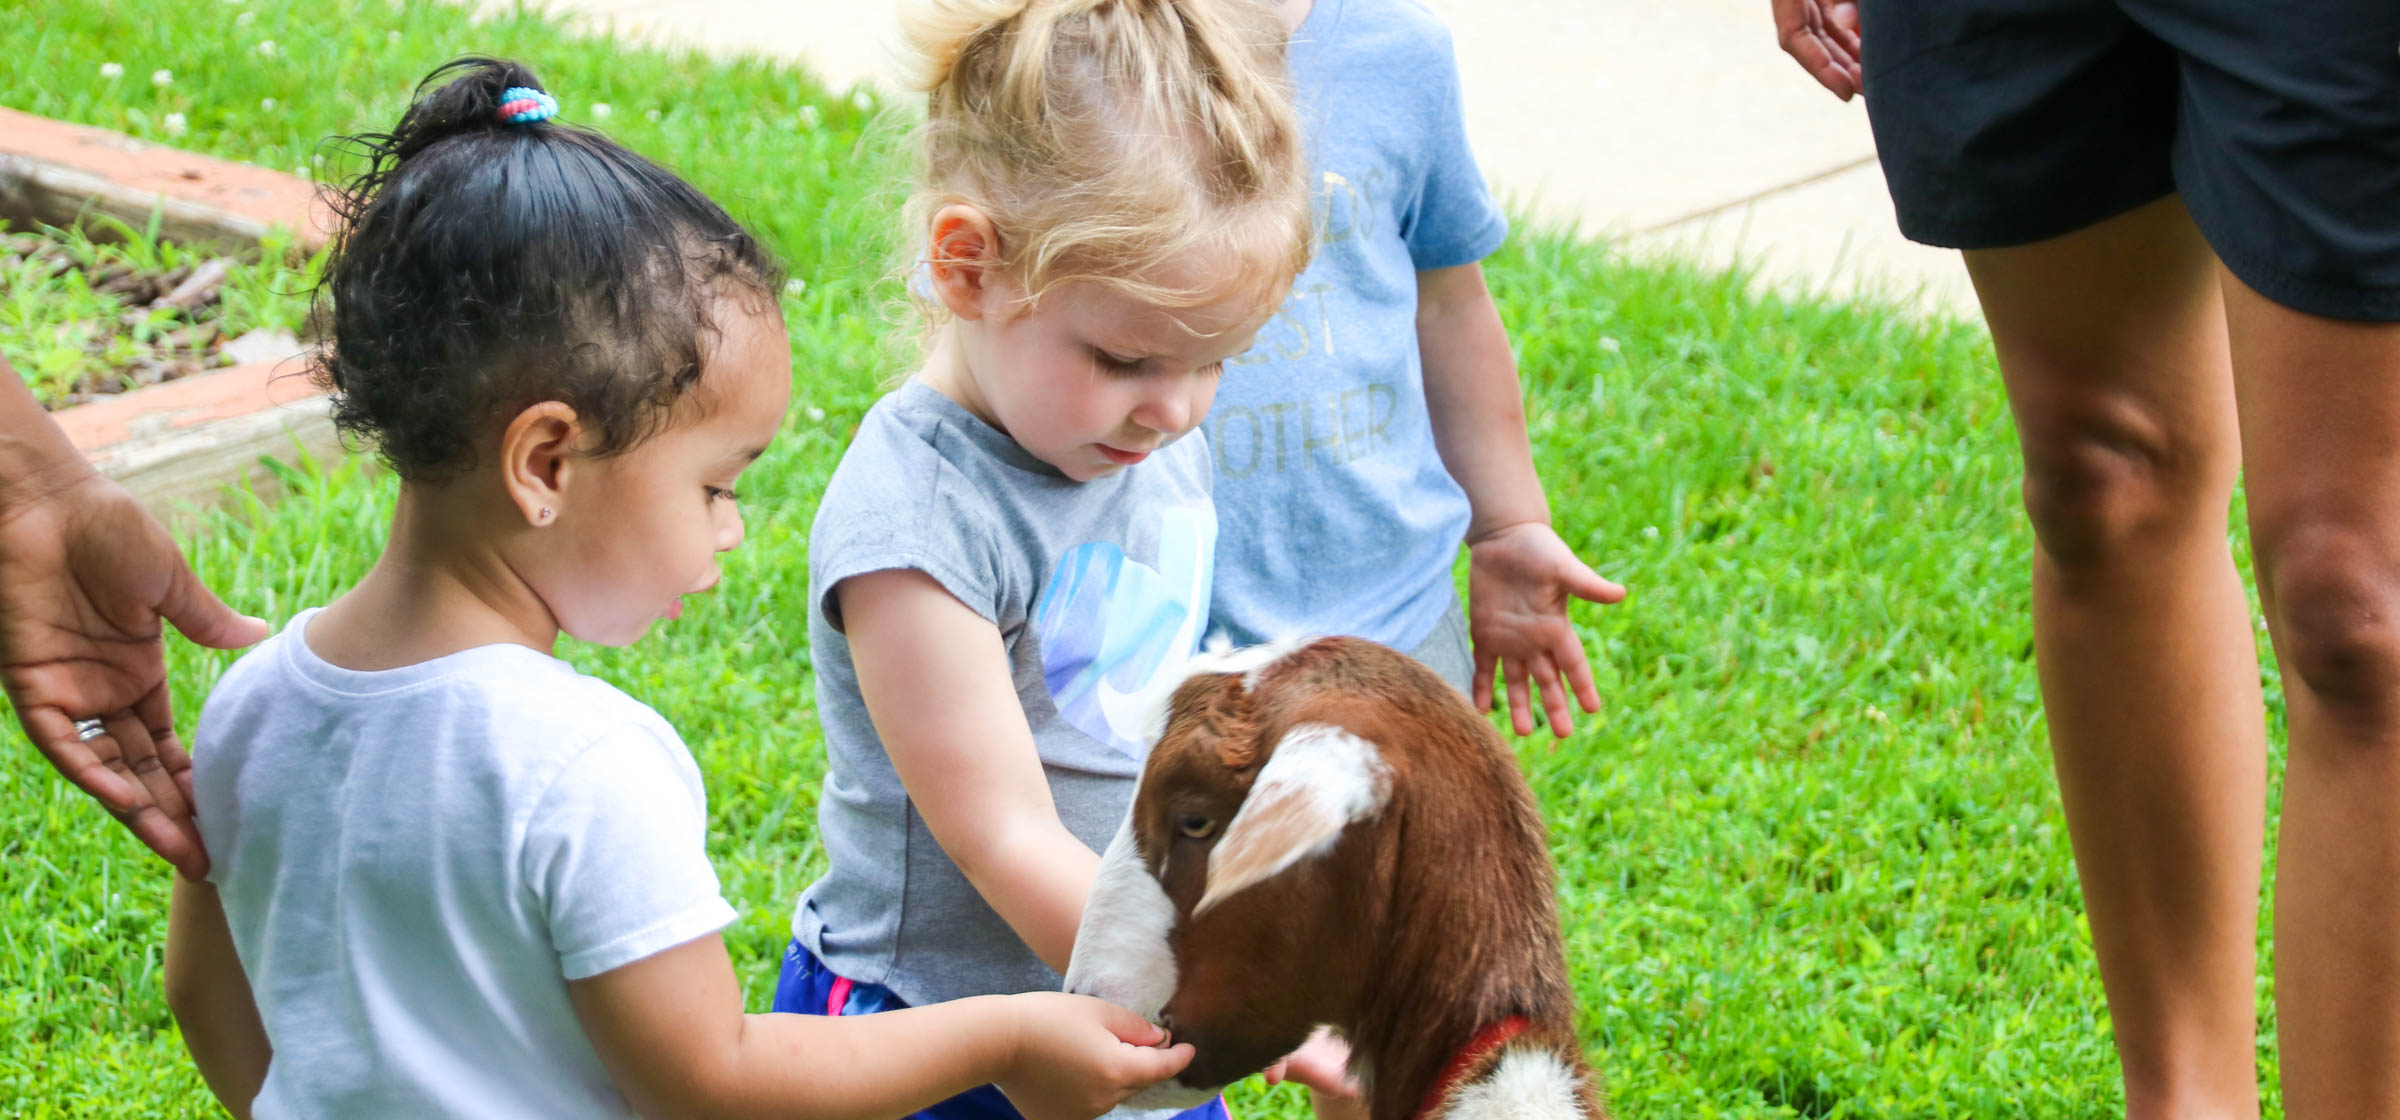 Two young campers feeding a goat